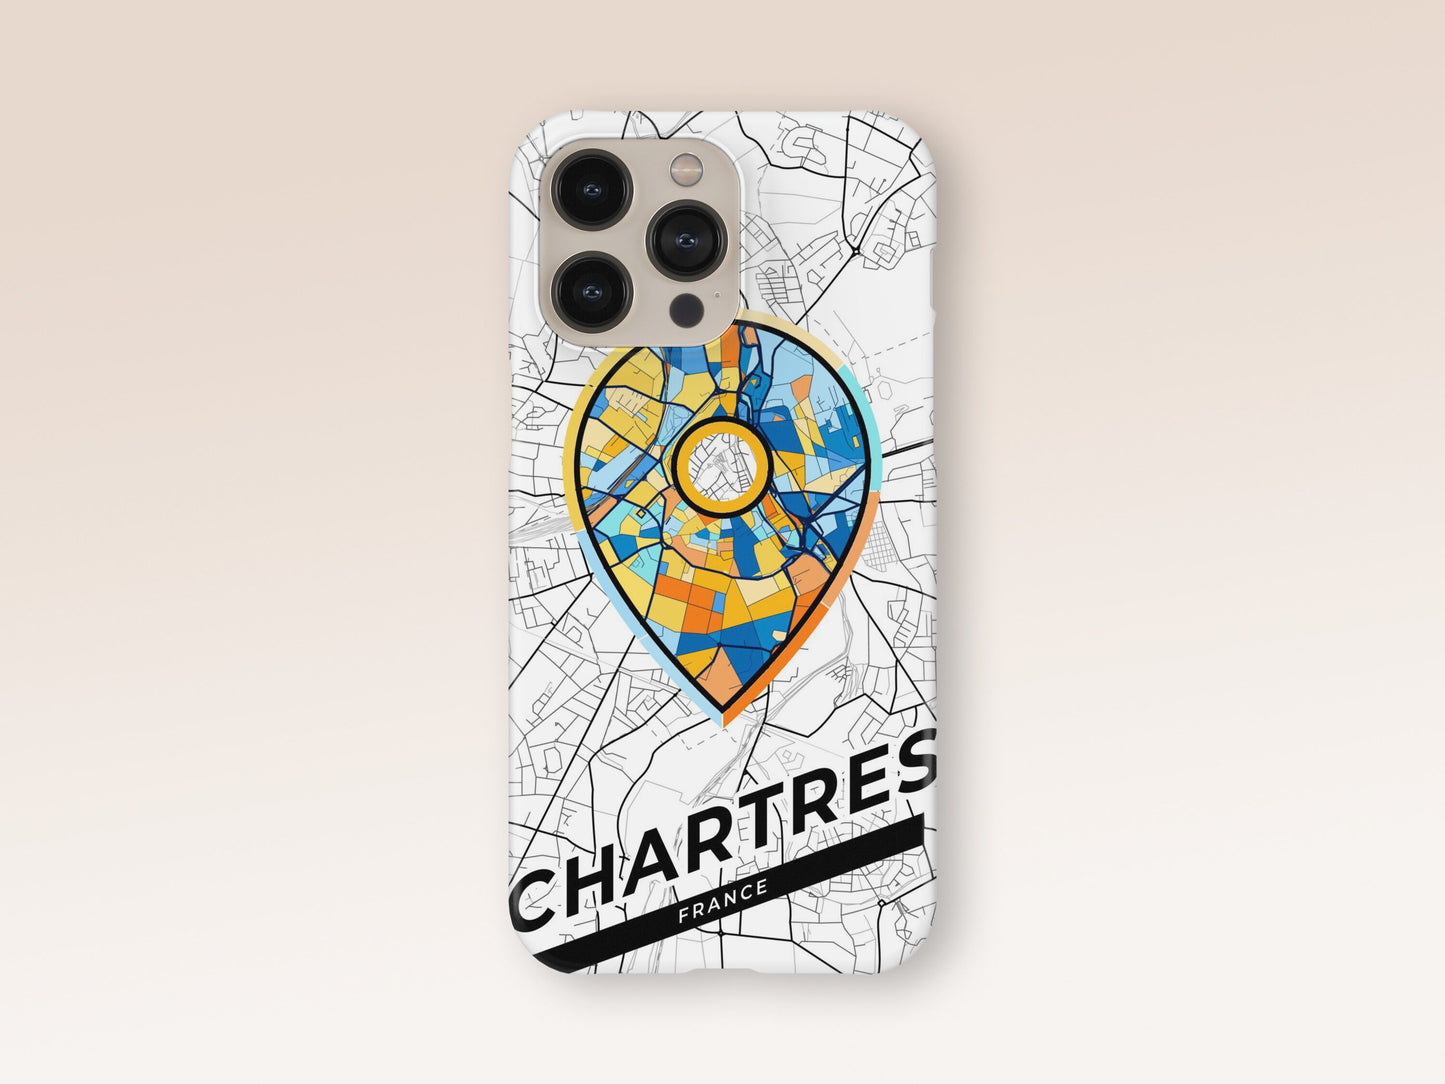 Chartres France slim phone case with colorful icon. Birthday, wedding or housewarming gift. Couple match cases. 1